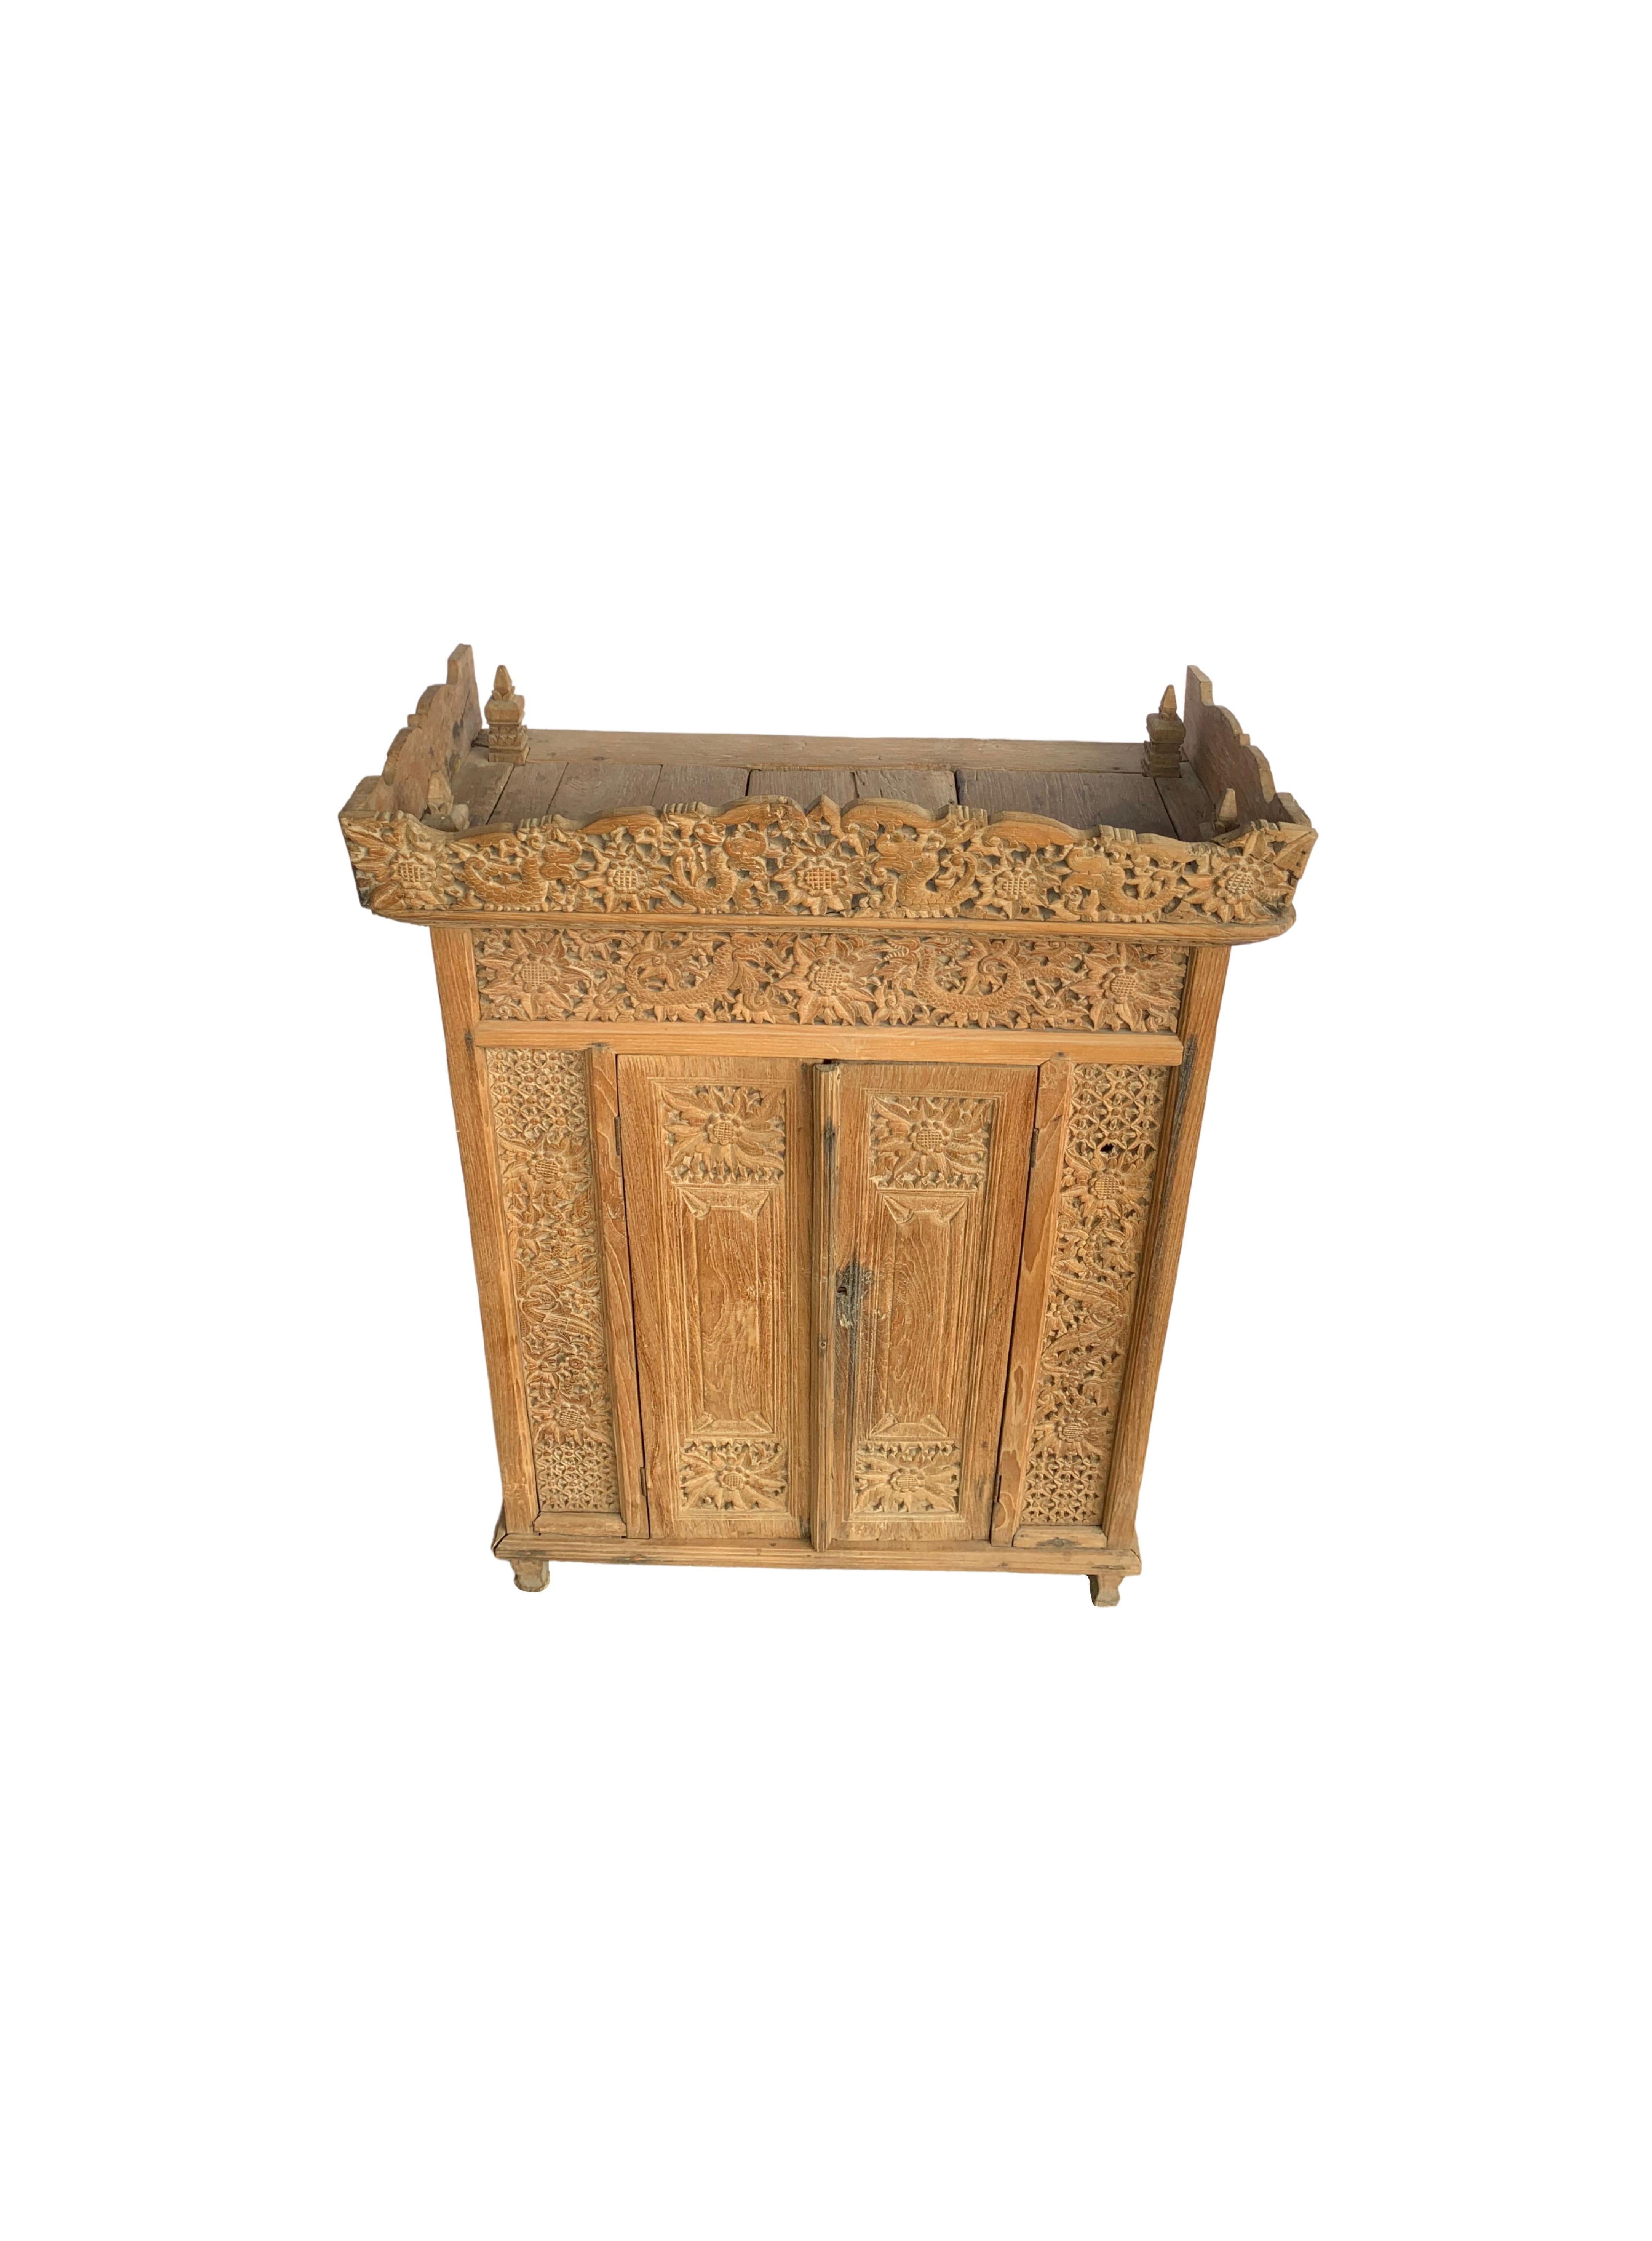 20th Century Indonesian Teak Cabinet from Java with Elaborate Carved Detailing, c. 1950